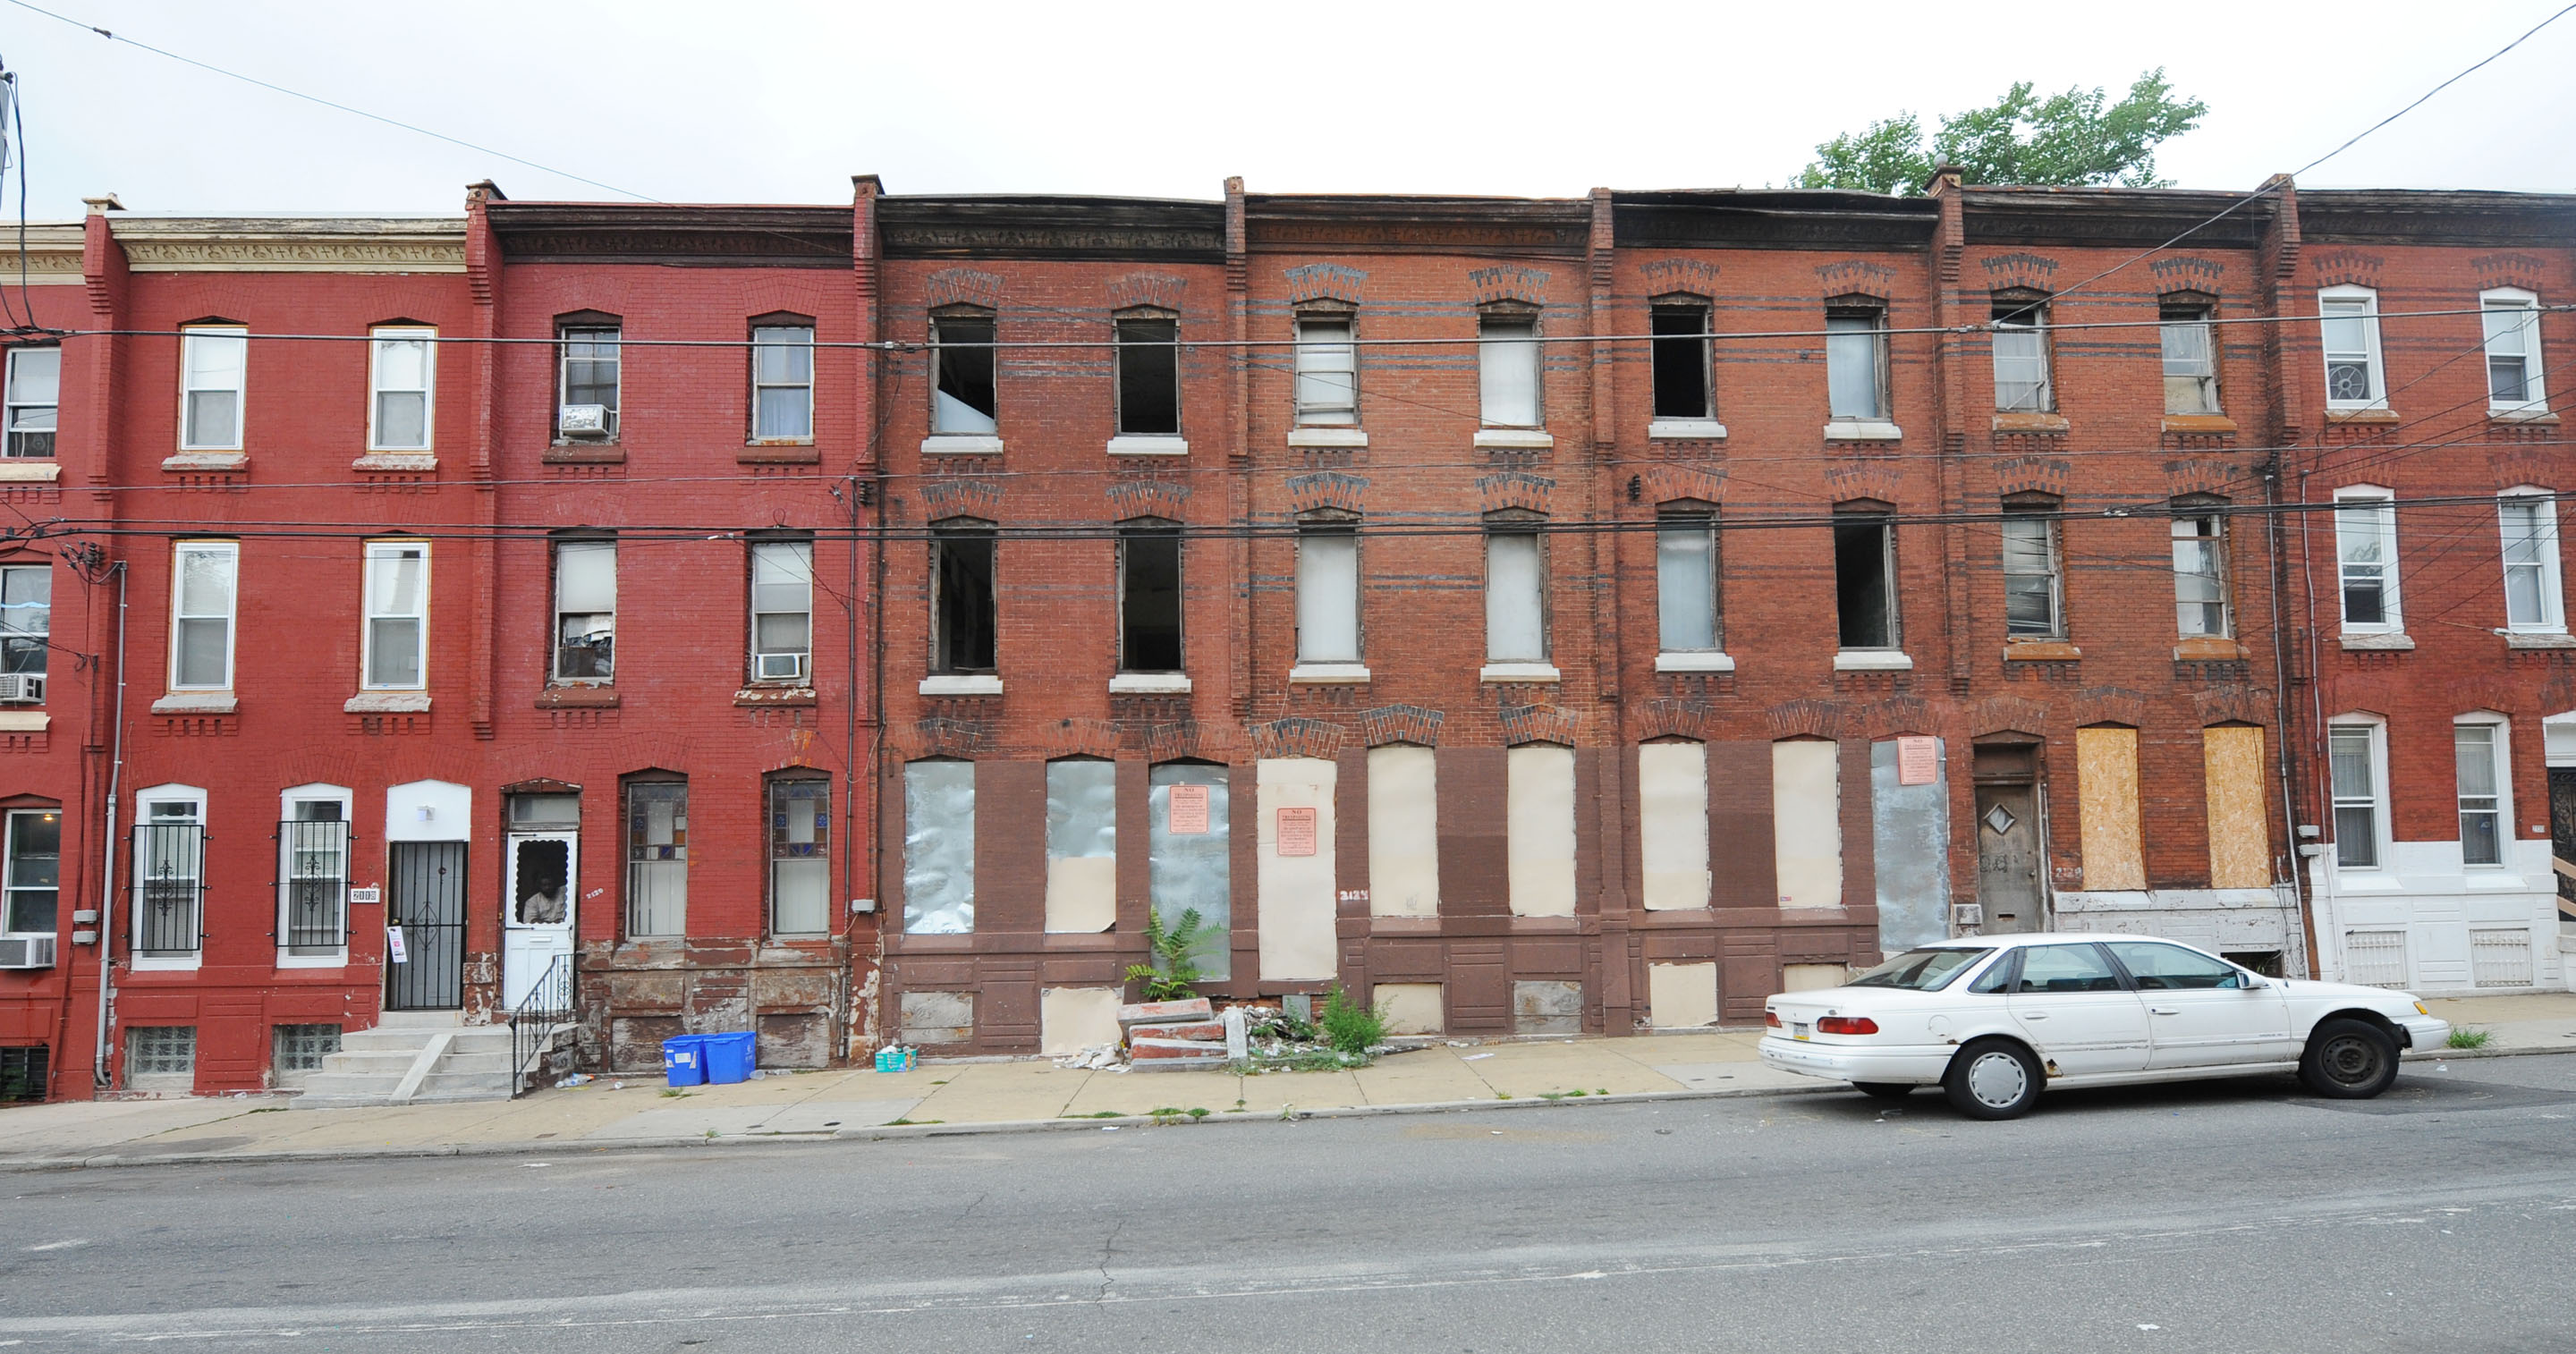 The 2100 block of N. 9th Street, full of abandoned and delinquent lots, near a major new development. (Clem Murray / Inquirer)